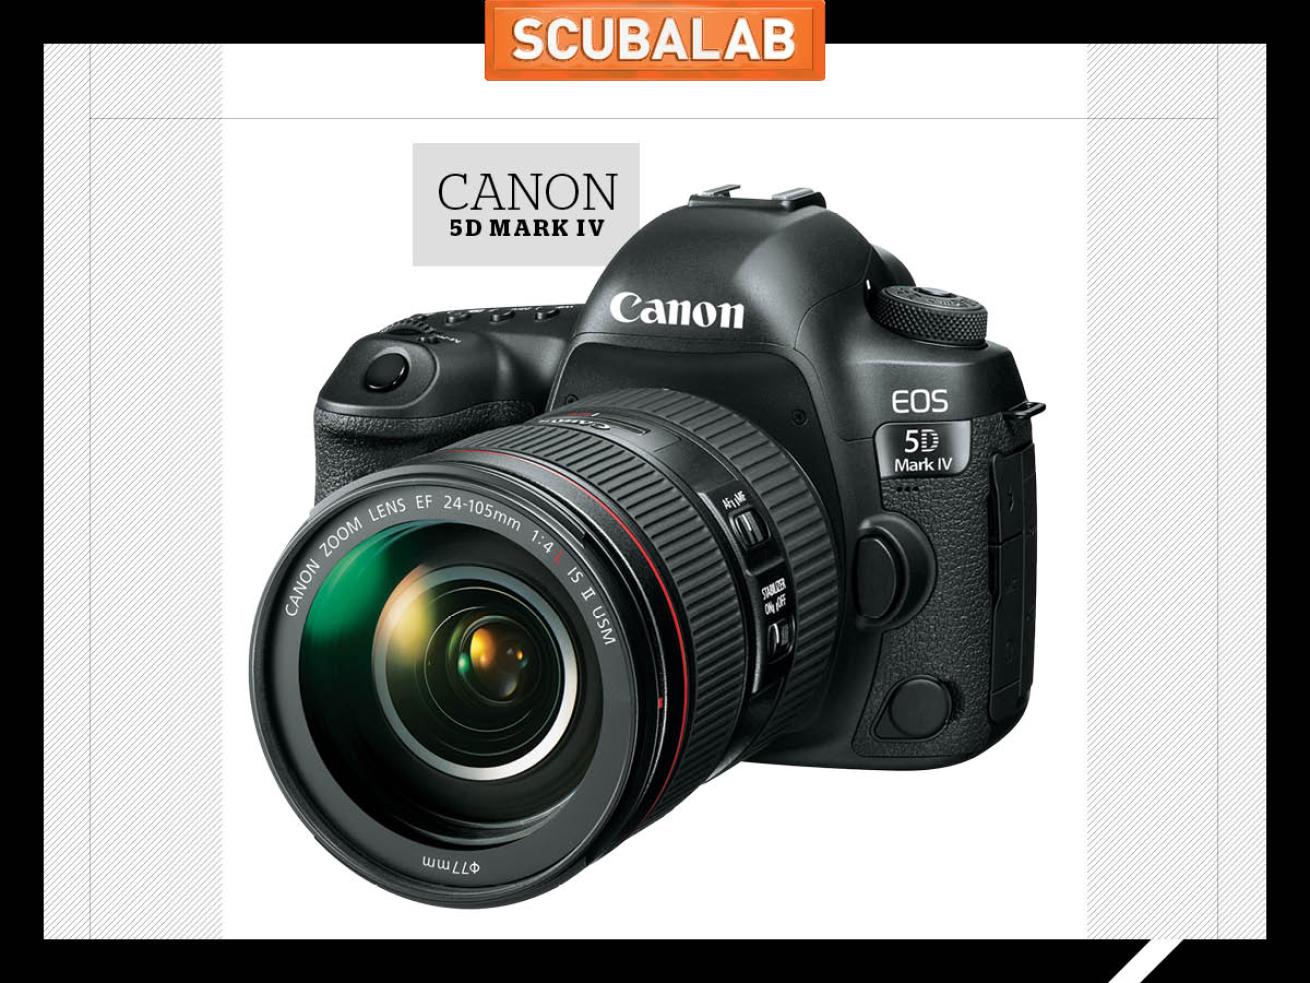 Canon 5D Mark IV camera for underwater photography